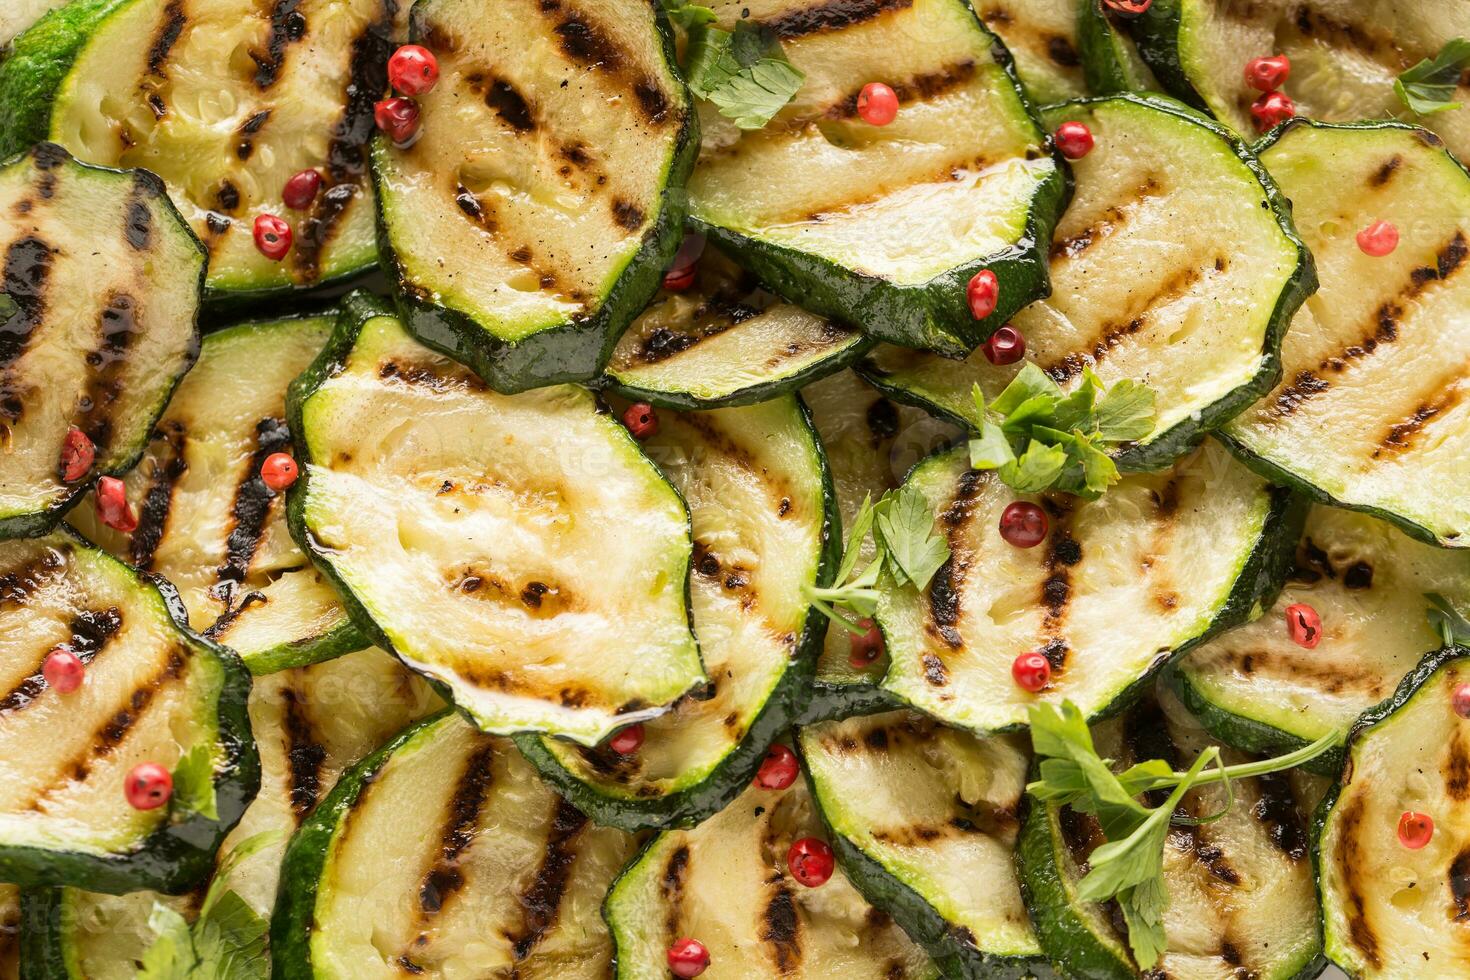 Zucchini. Grilled zucchini with red spice photo